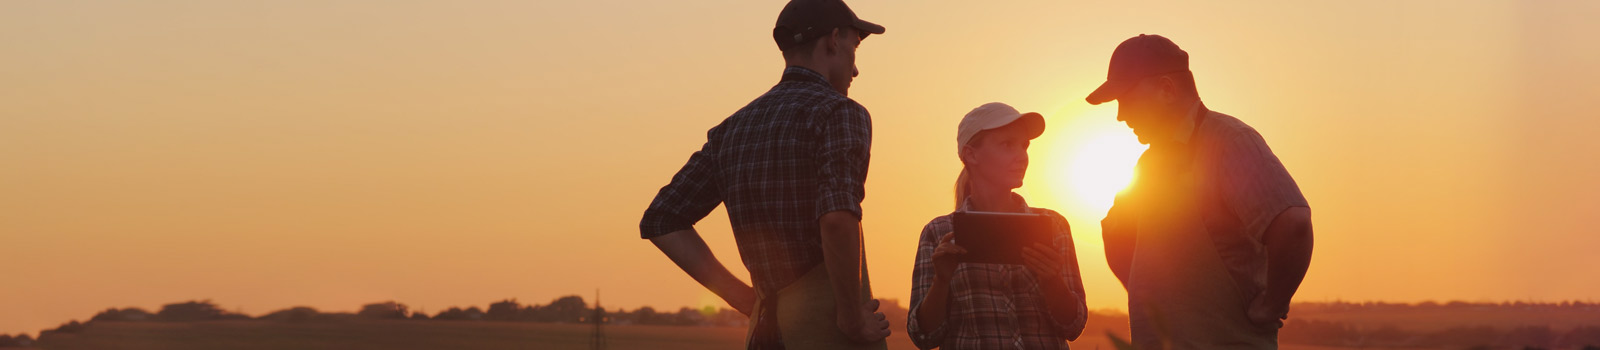 Three farmers standing in a field at sunset